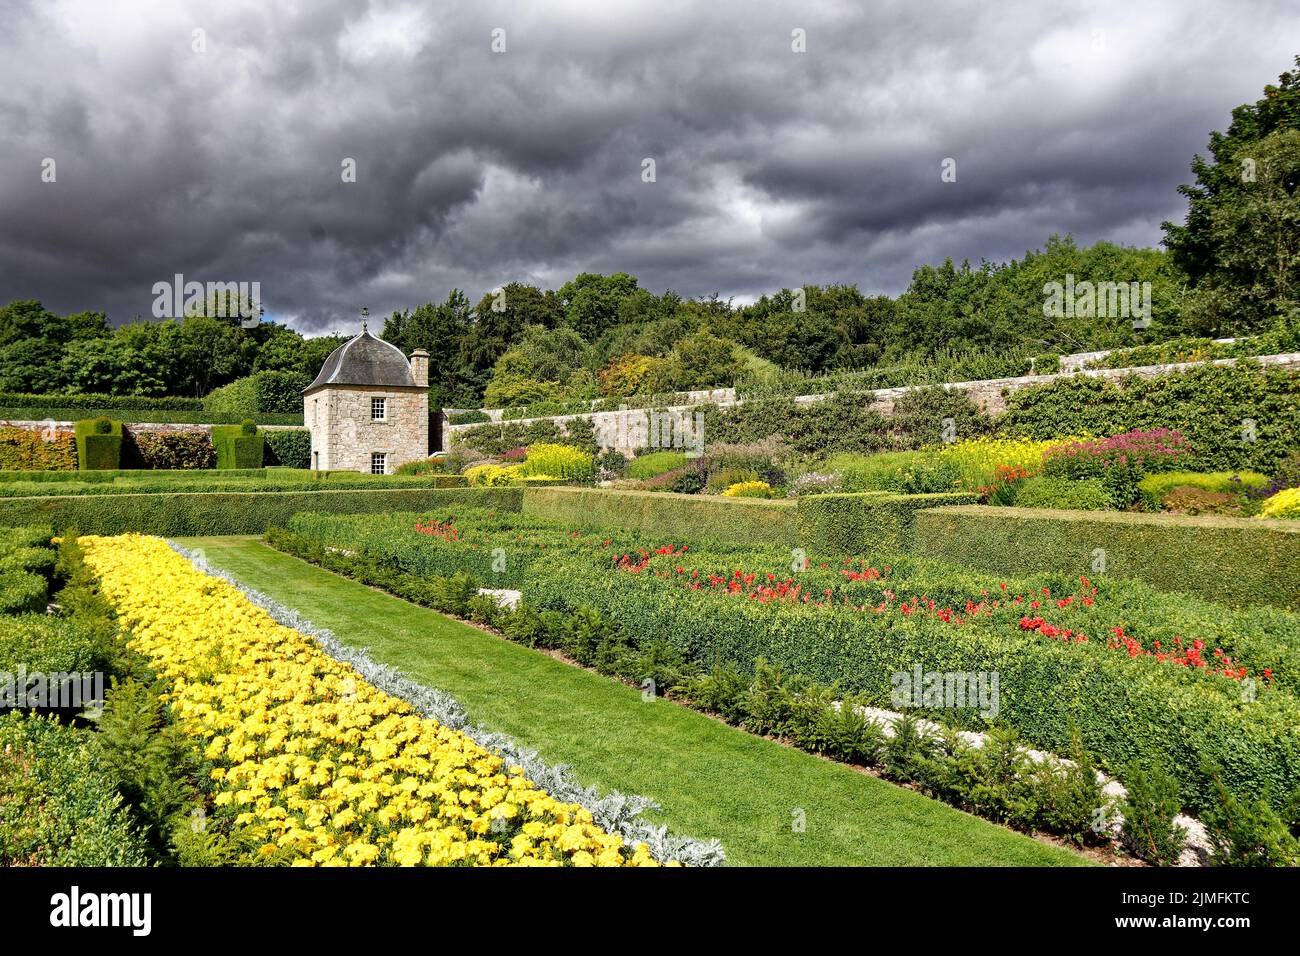 PITMEDDEN GARDEN ABERDEENSHIRE SCOTLAND IN SUMMER PERENNIAL FLOWER BORDERS BOX HEDGES AND TWIN OGEE ROOFED PAVILION Stock Photo